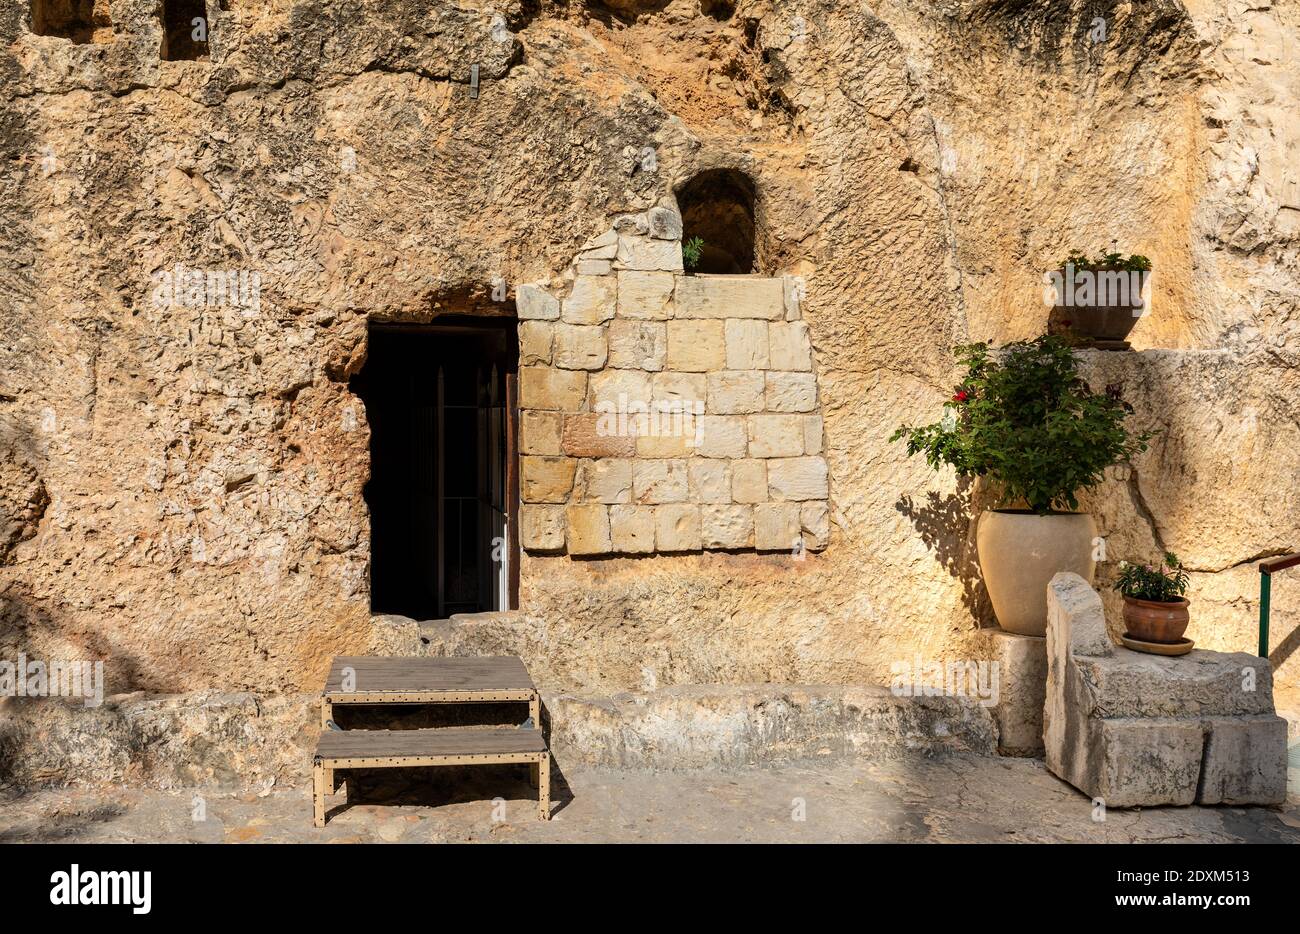 Jerusalem, Israel - October 14, 2017: Entrance to Garden Tomb considered as actual place of burial and resurrection of Jesus Christ near Old City Stock Photo